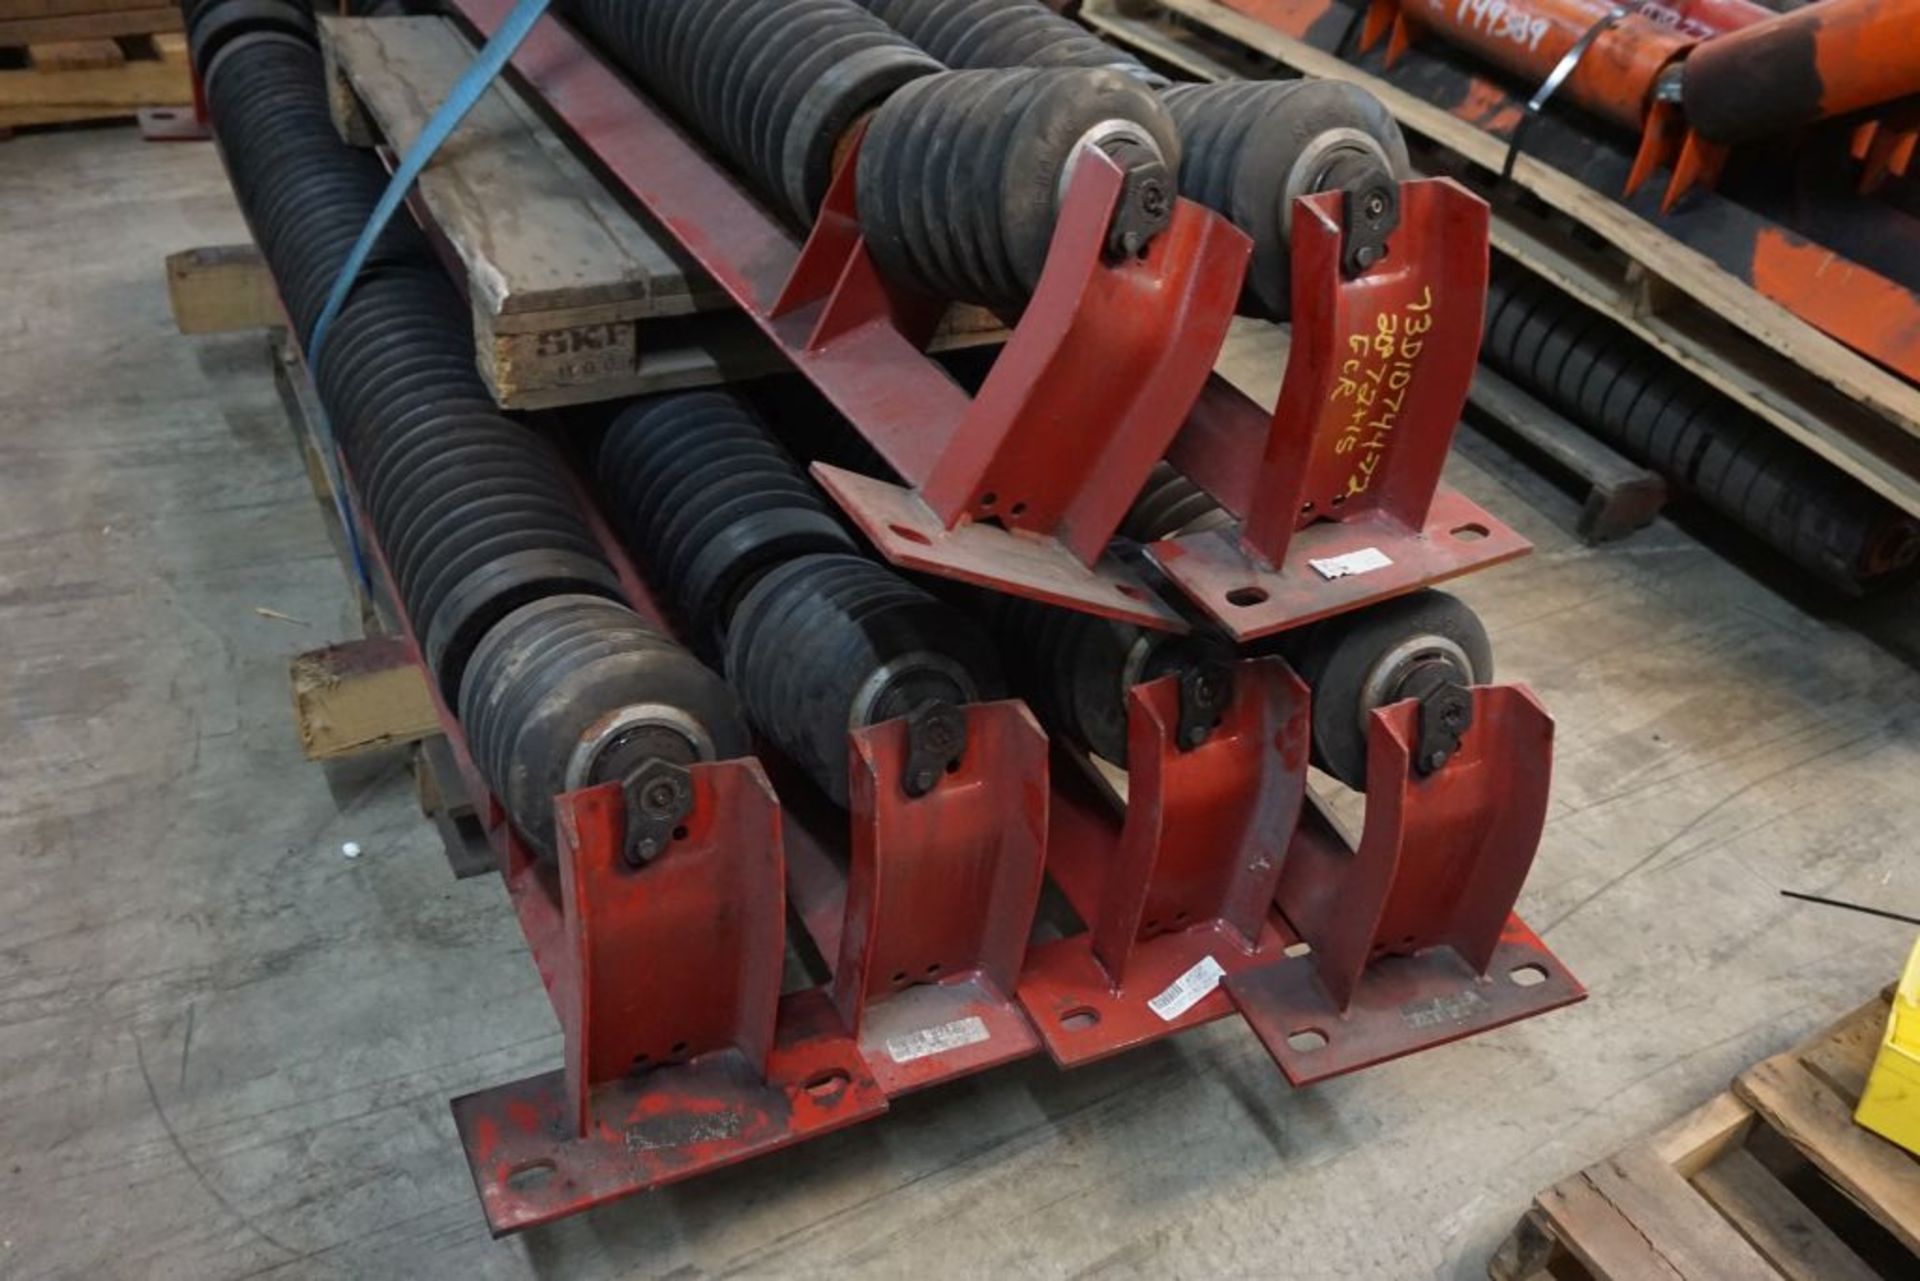 Lot of (6) 6"Diameter Training Idlers|75" Working Width; 90" Overall Width|Lot Loading Fee: $5.00 - Image 5 of 6